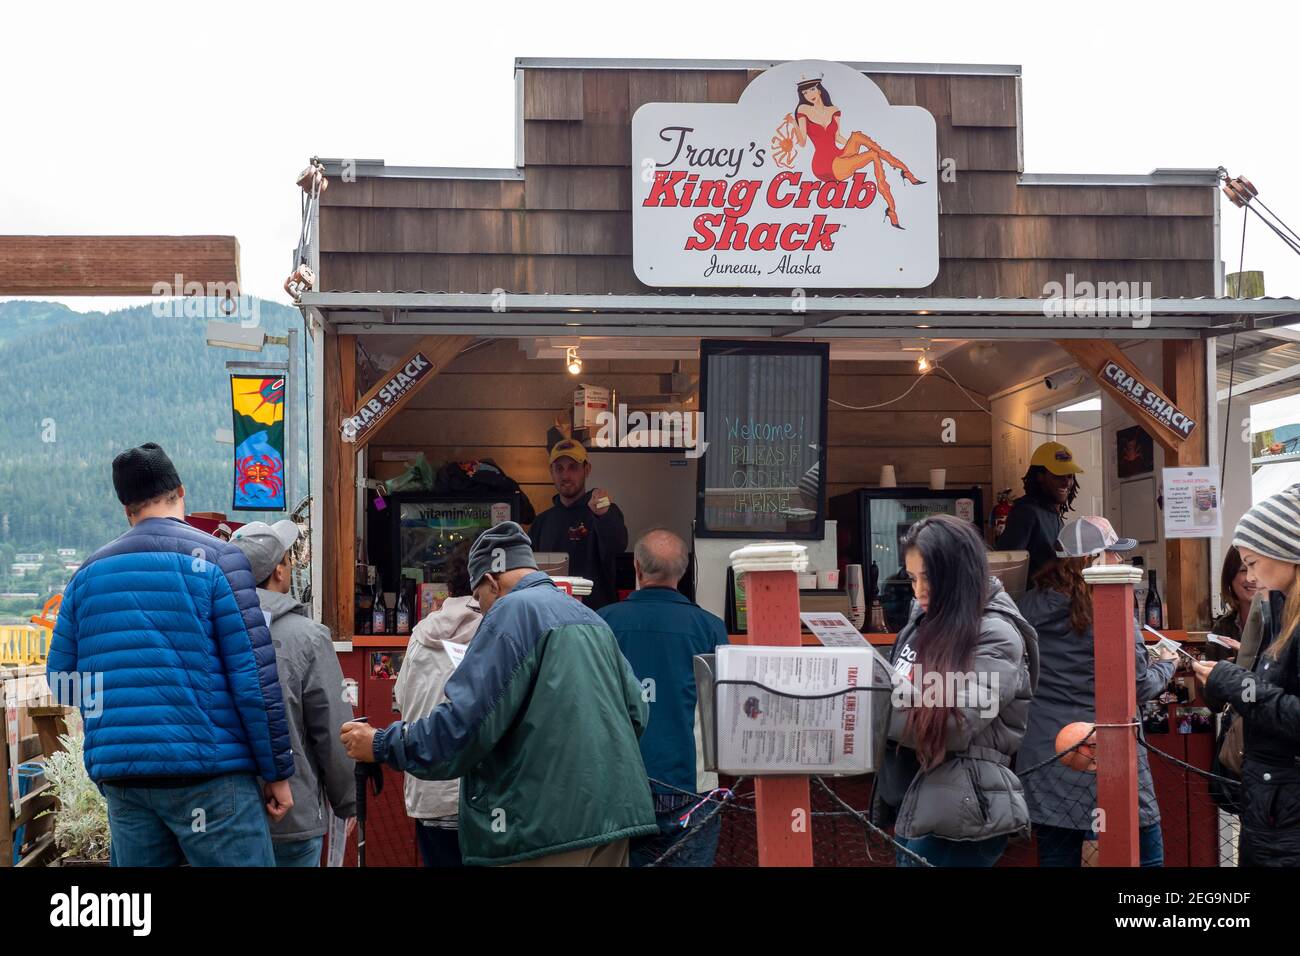 Tracy's King Crab Shack in Juneau, Alaska is famous for its King Crab Stock Photo